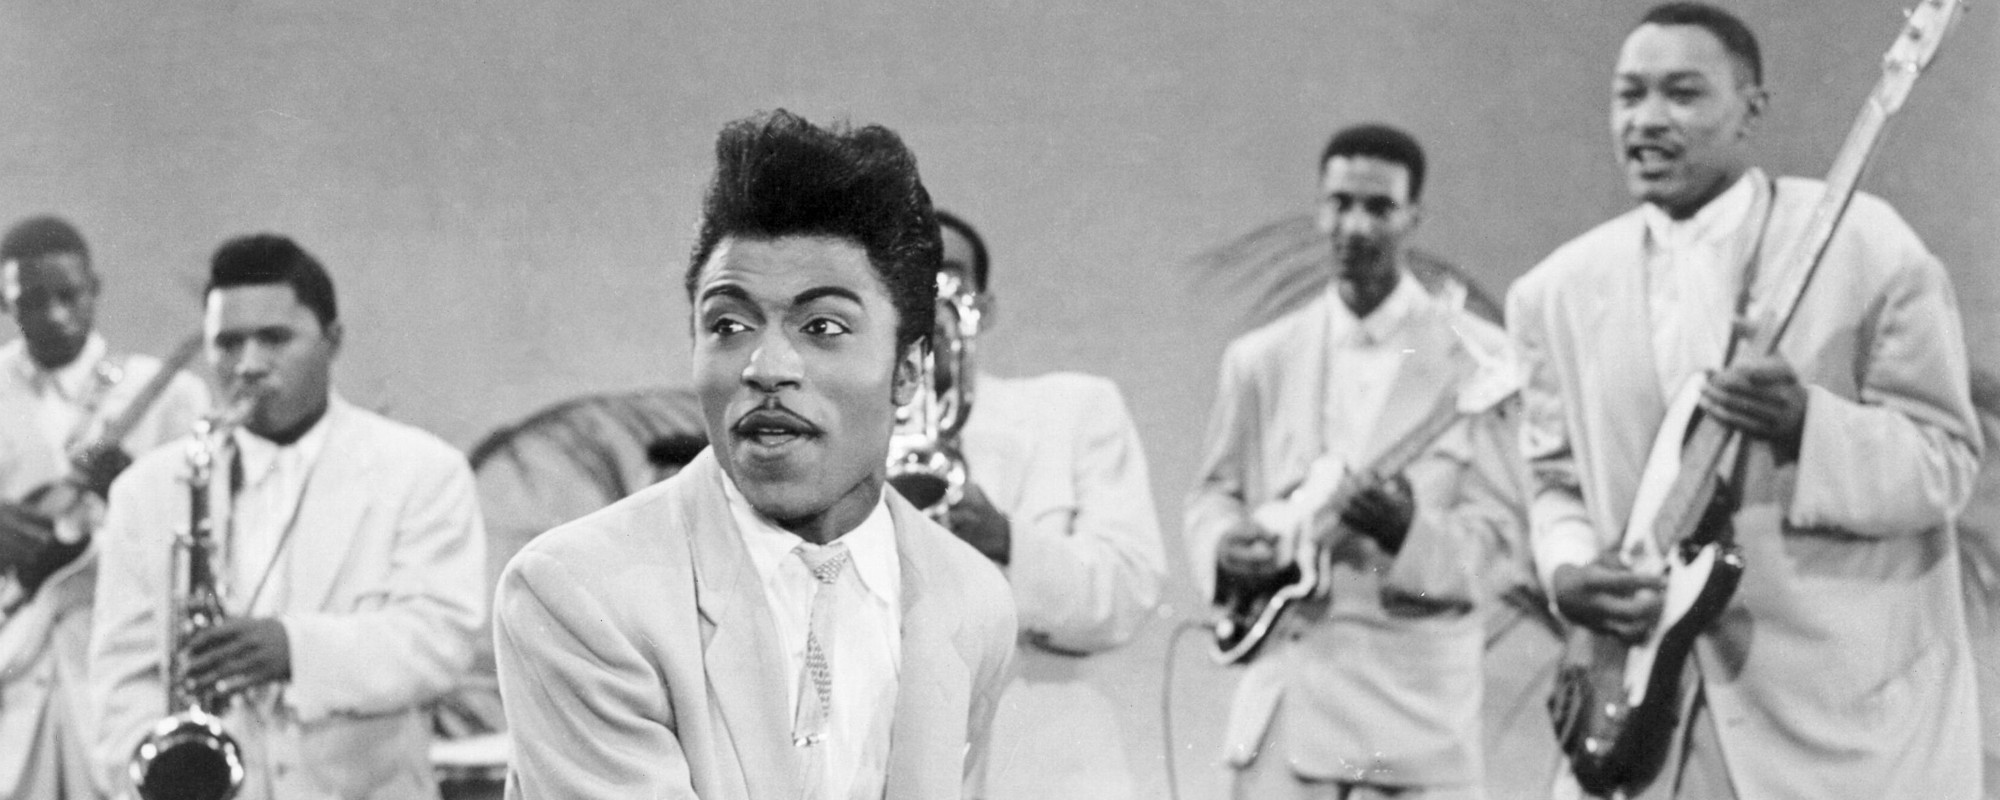 “A Blessin’ and a Lesson”: The Story Behind “Tutti Frutti” by Little Richard